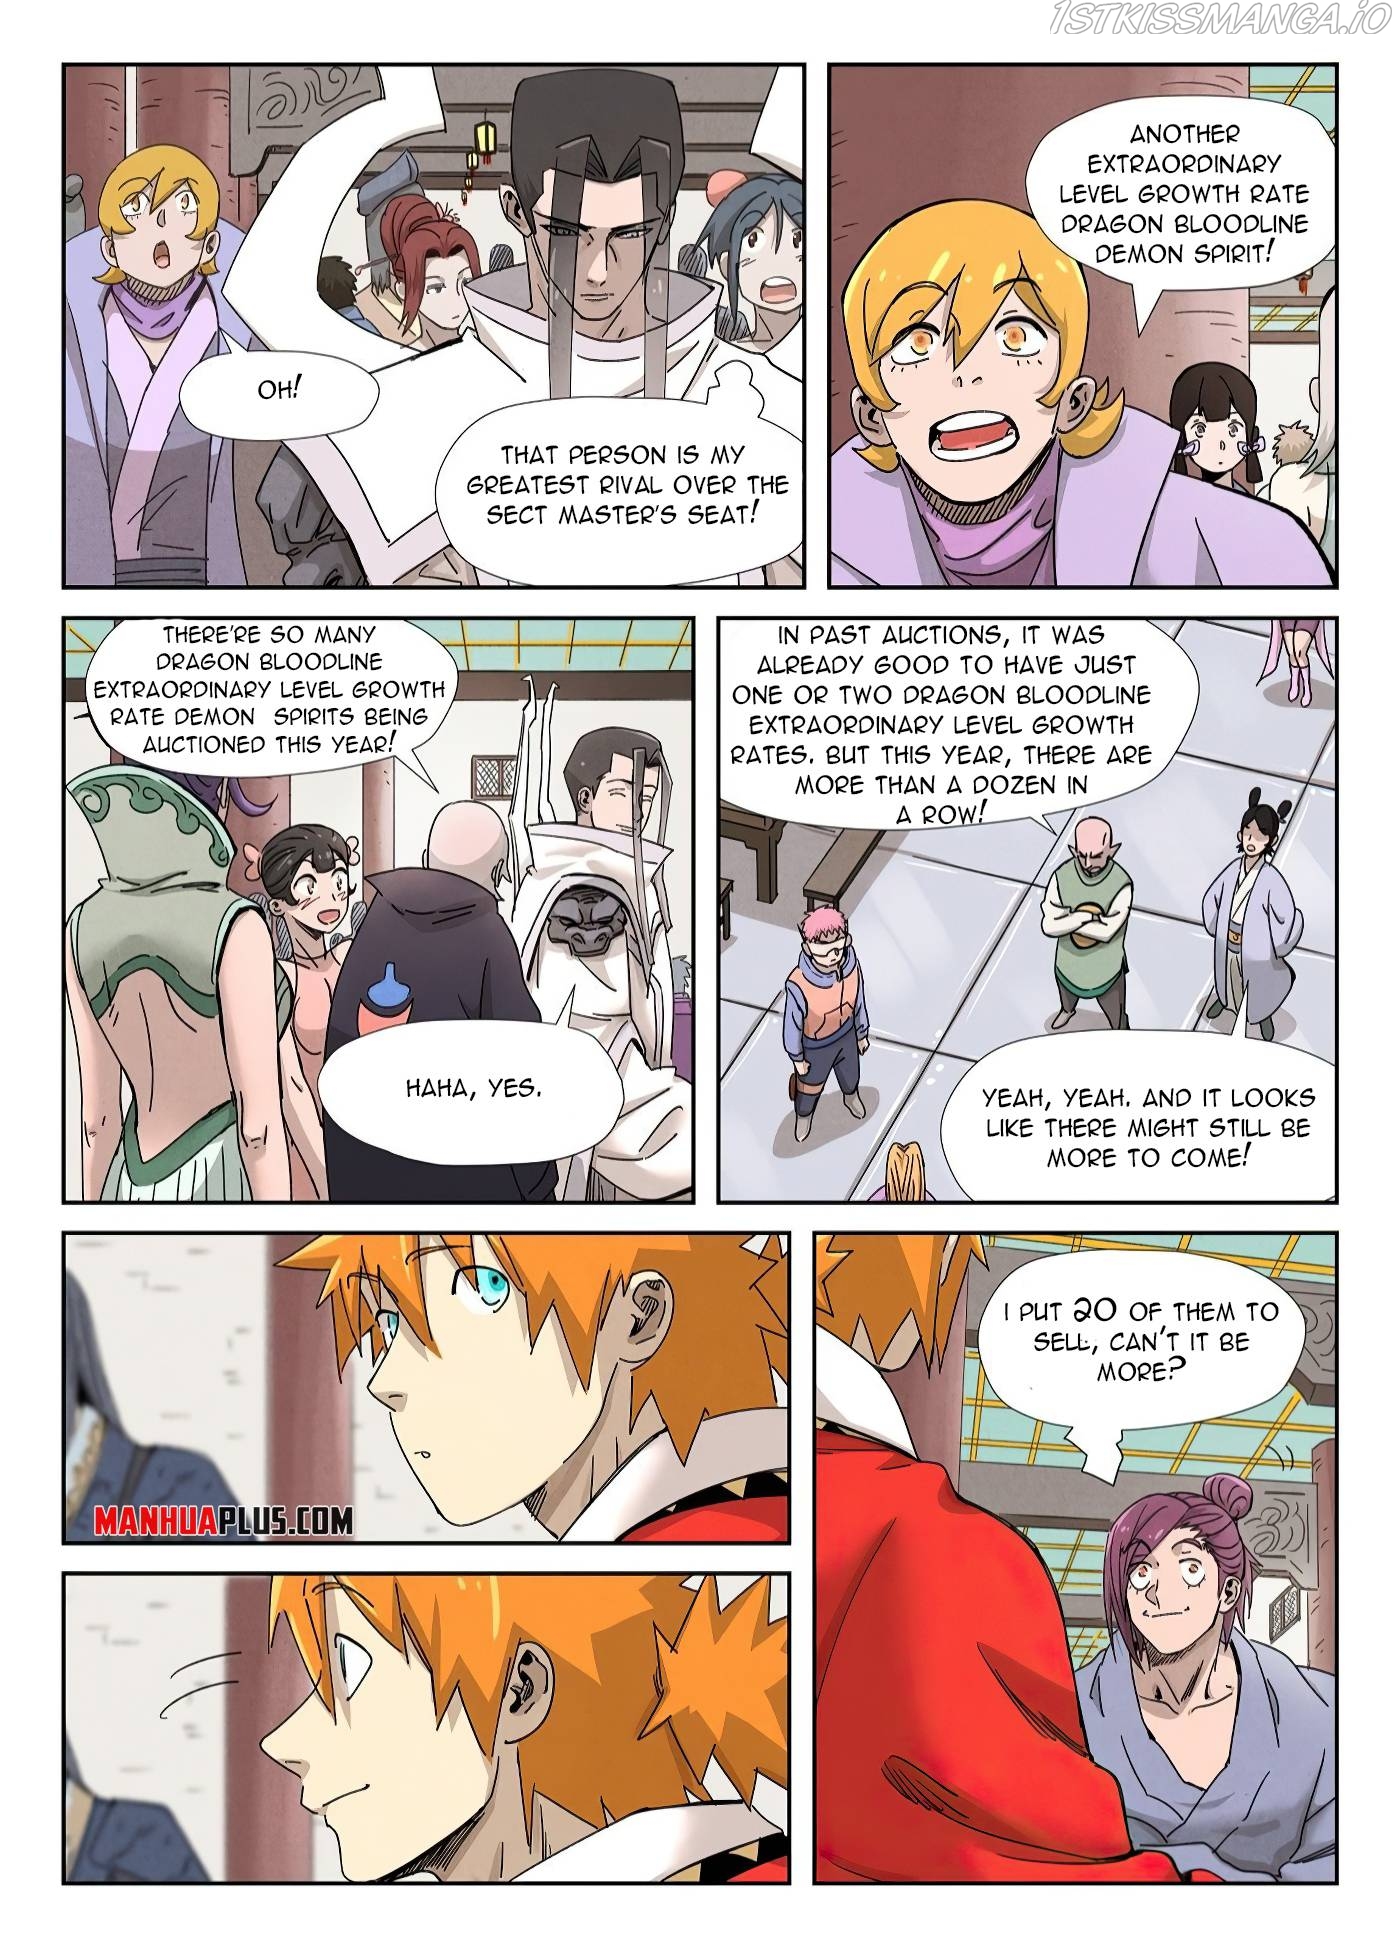 Tales of Demons and Gods Manhua Chapter 337.6 - Page 3